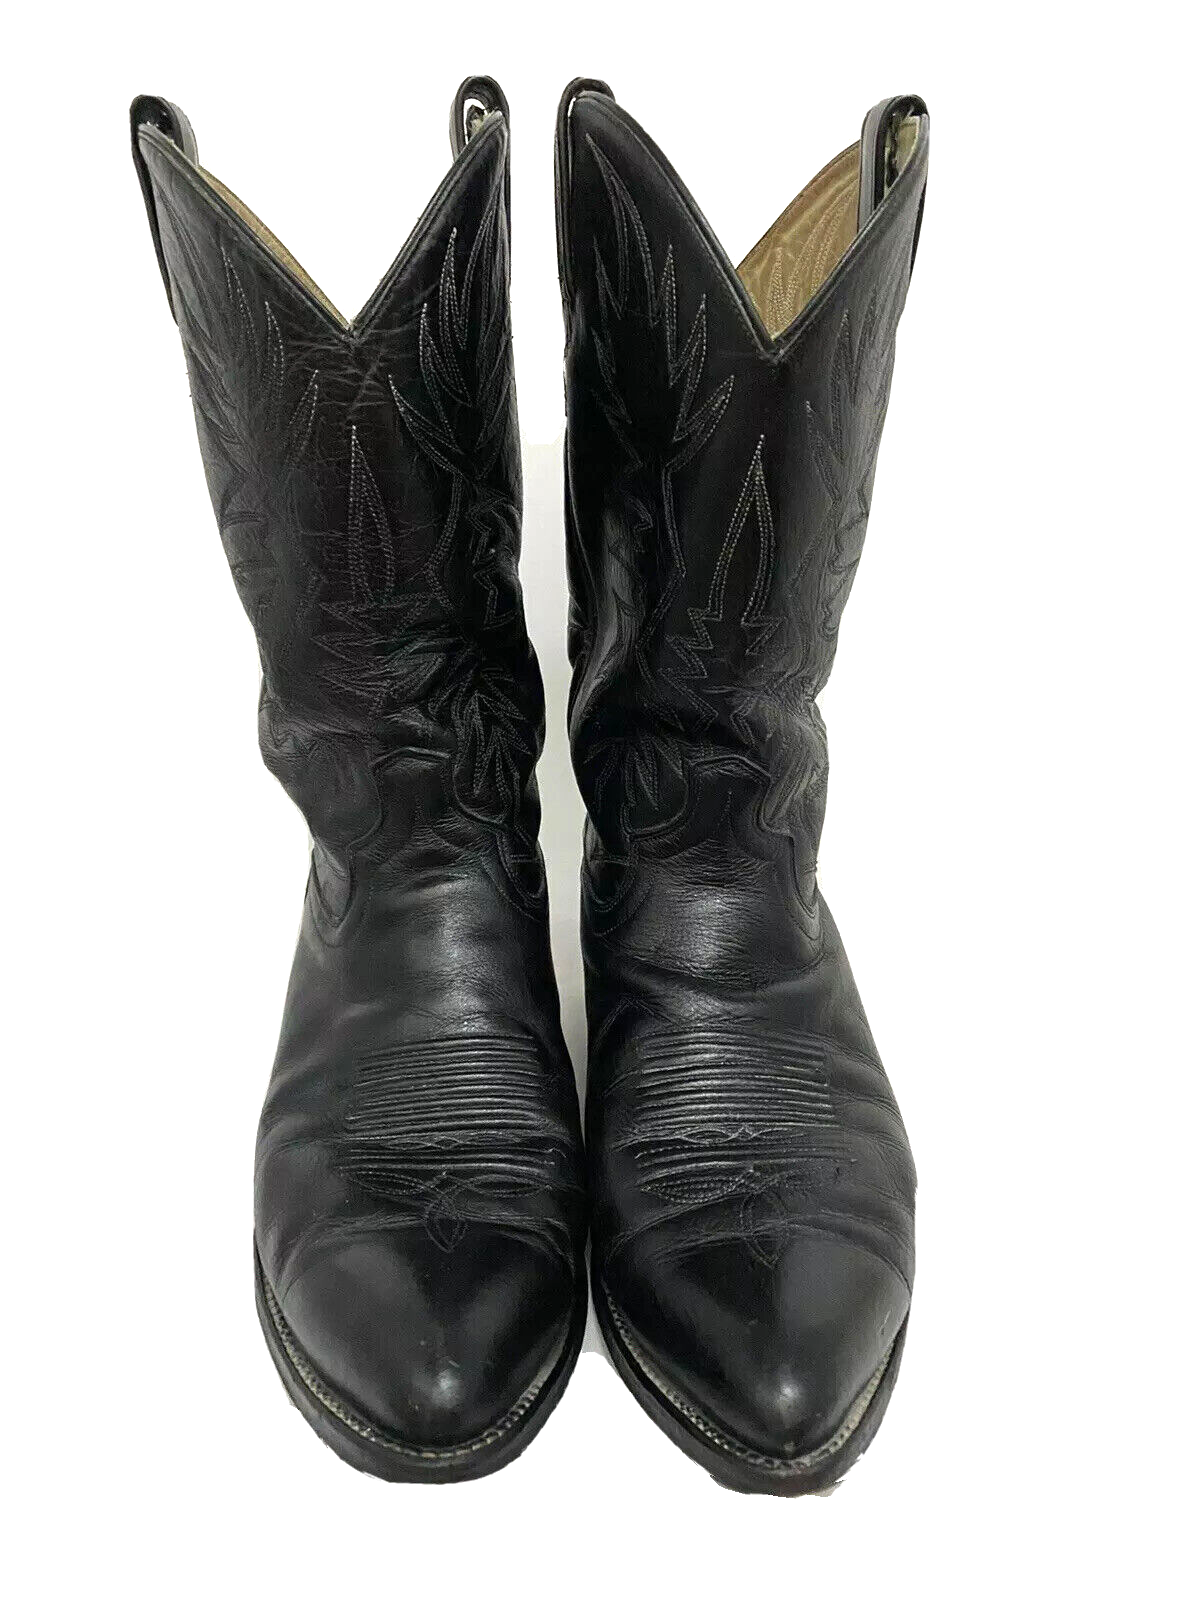 Primary image for Dan Post Mens Black Leather Cowboy Western Country Rodeo Boots US 8.5 Pull On